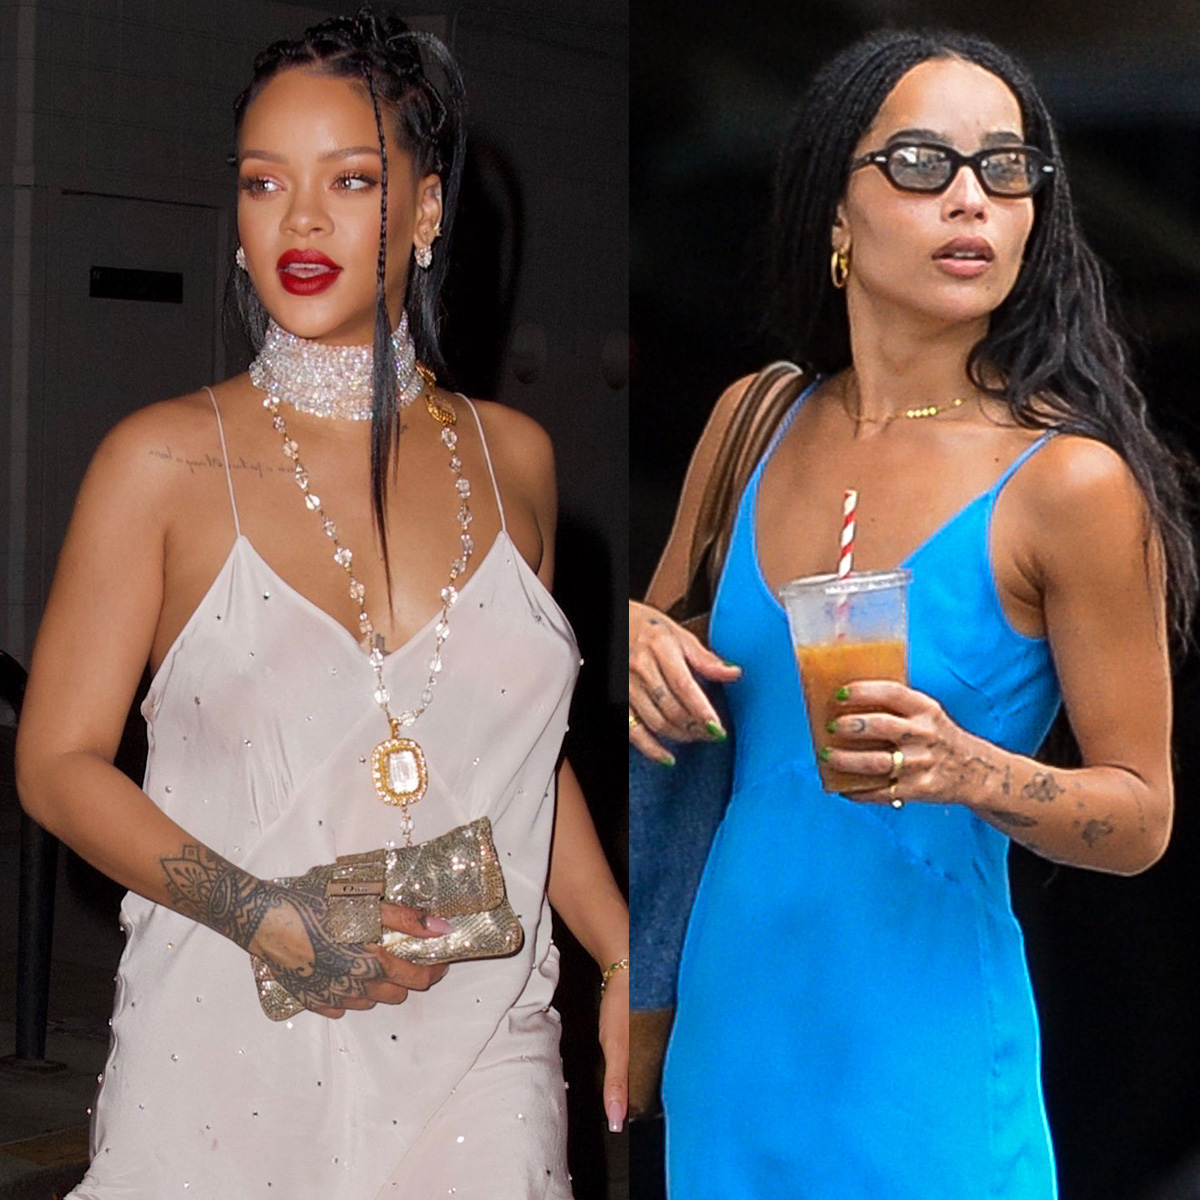 Slip Dresses: The Celeb Trend That's Comfy, Chic, & Easy to Wear